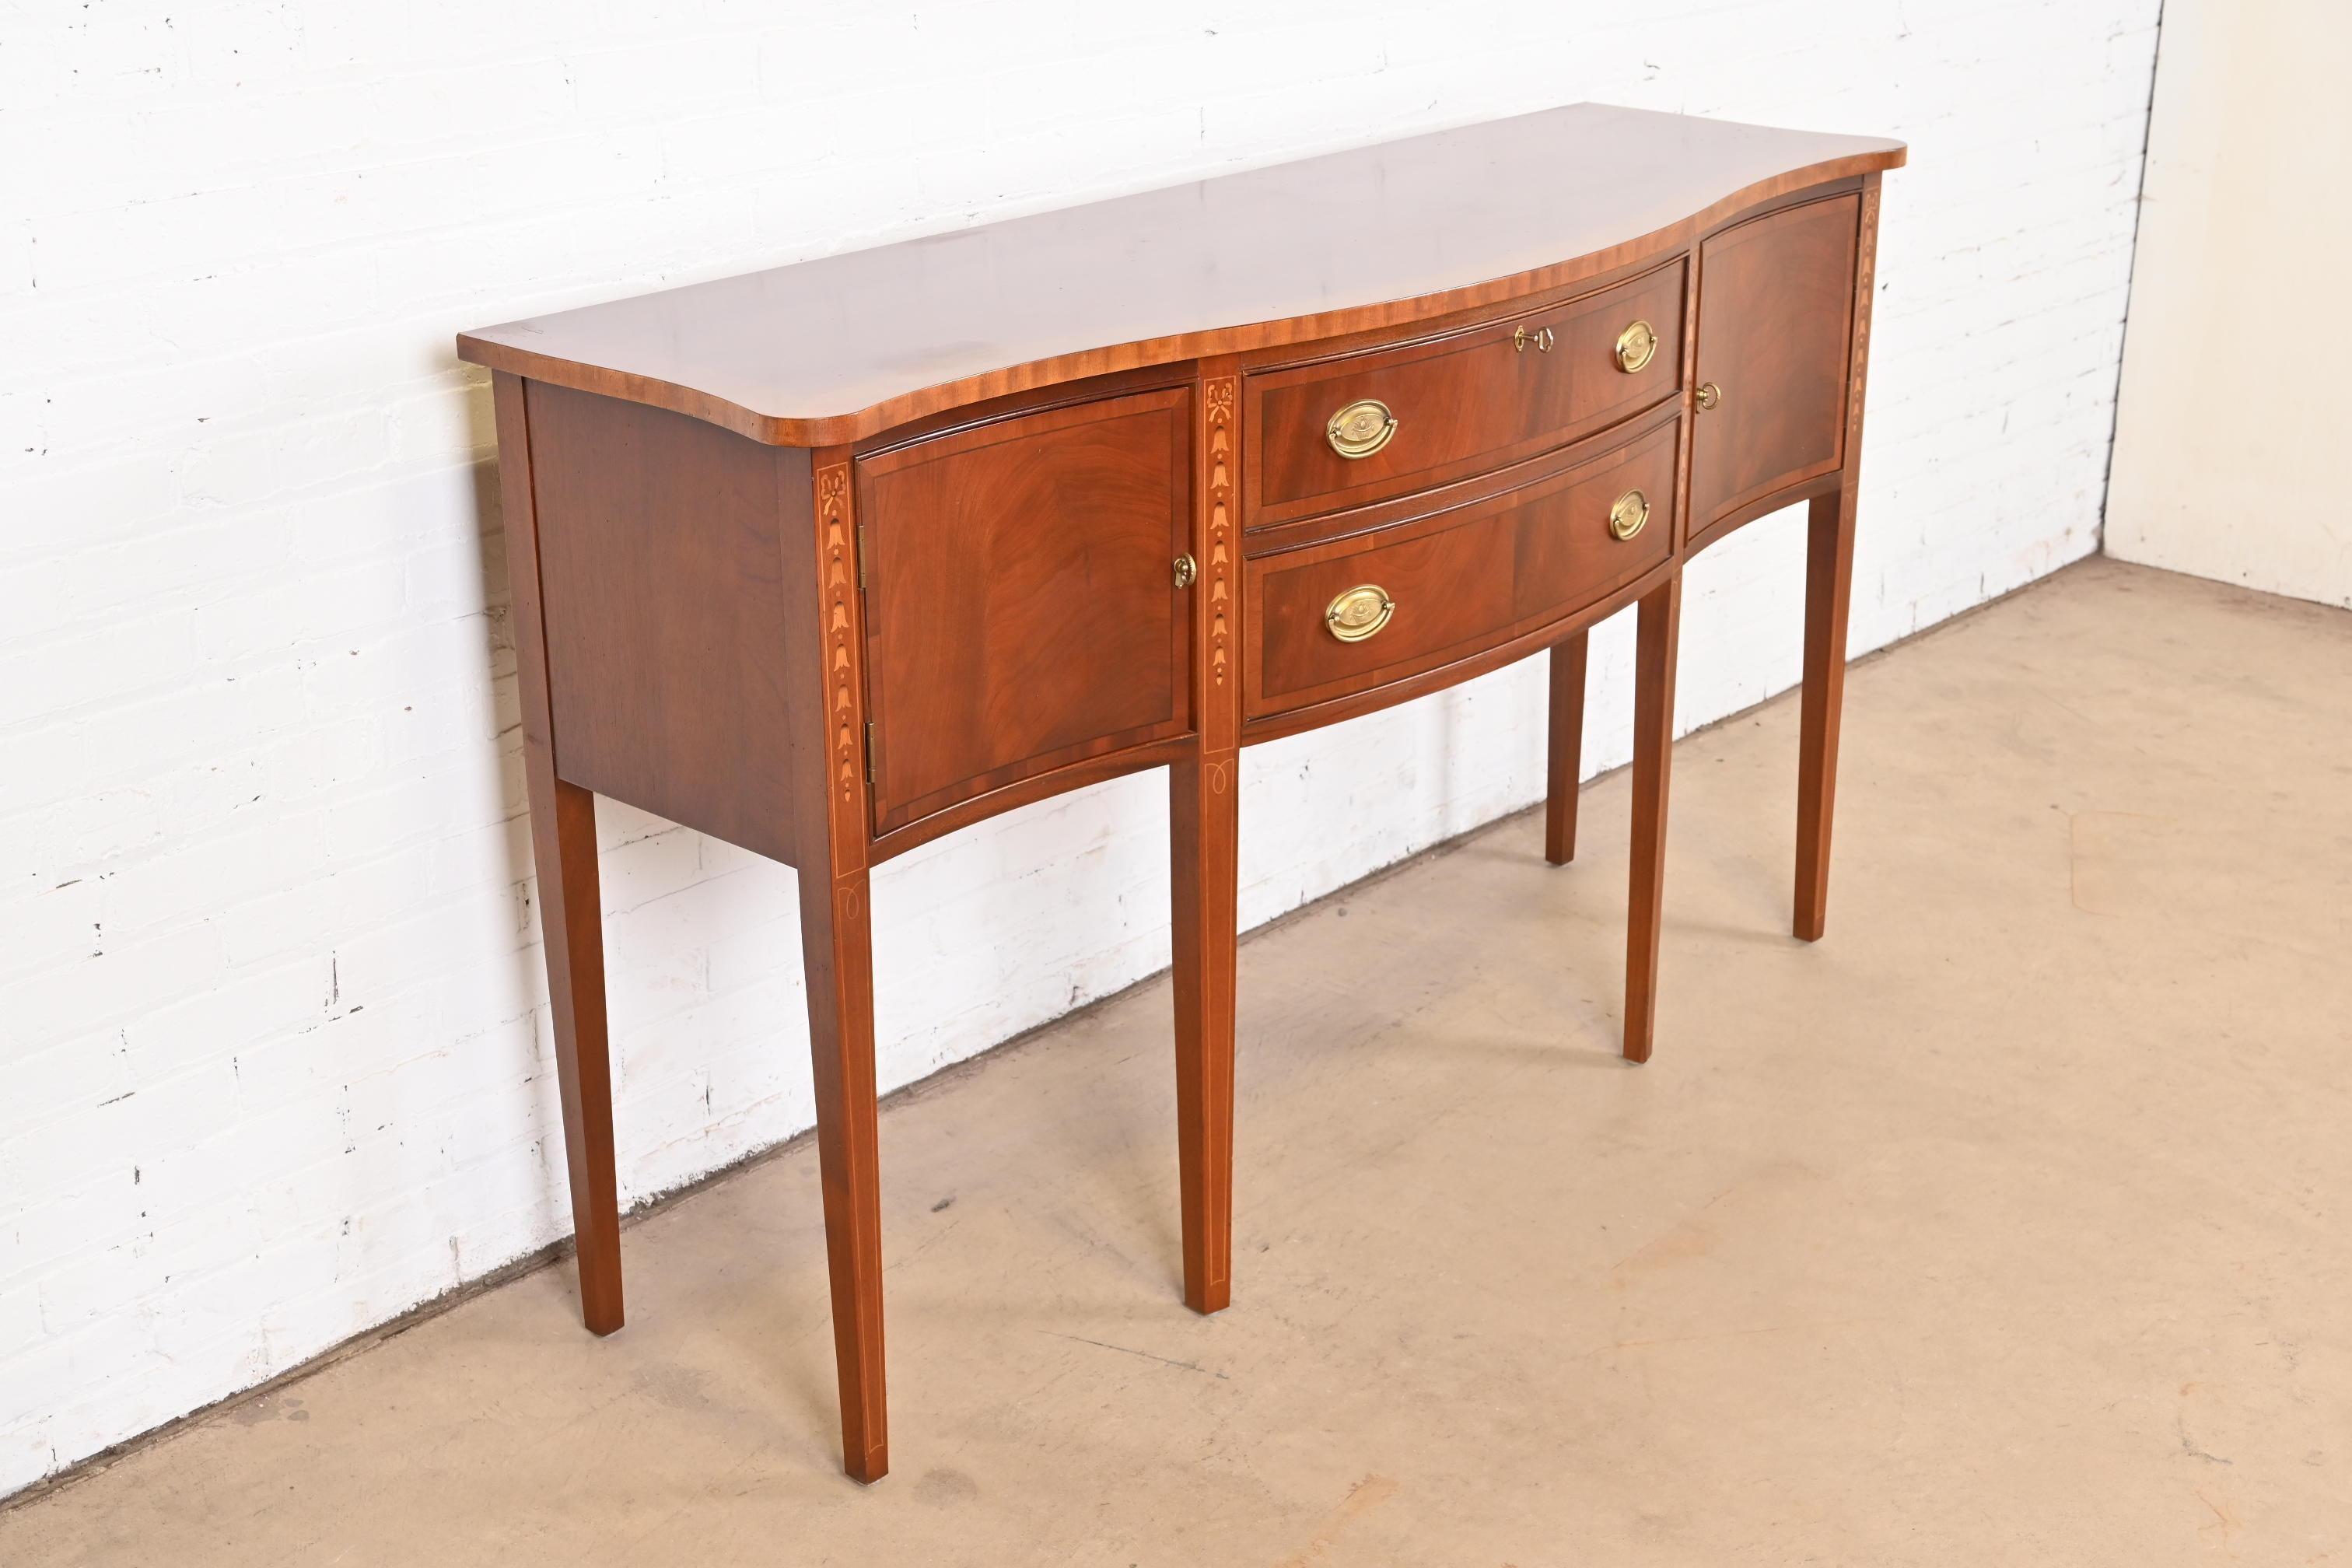 Hepplewhite Inlaid Mahogany Serpentine Front Sideboard Buffet or Credenza For Sale 1